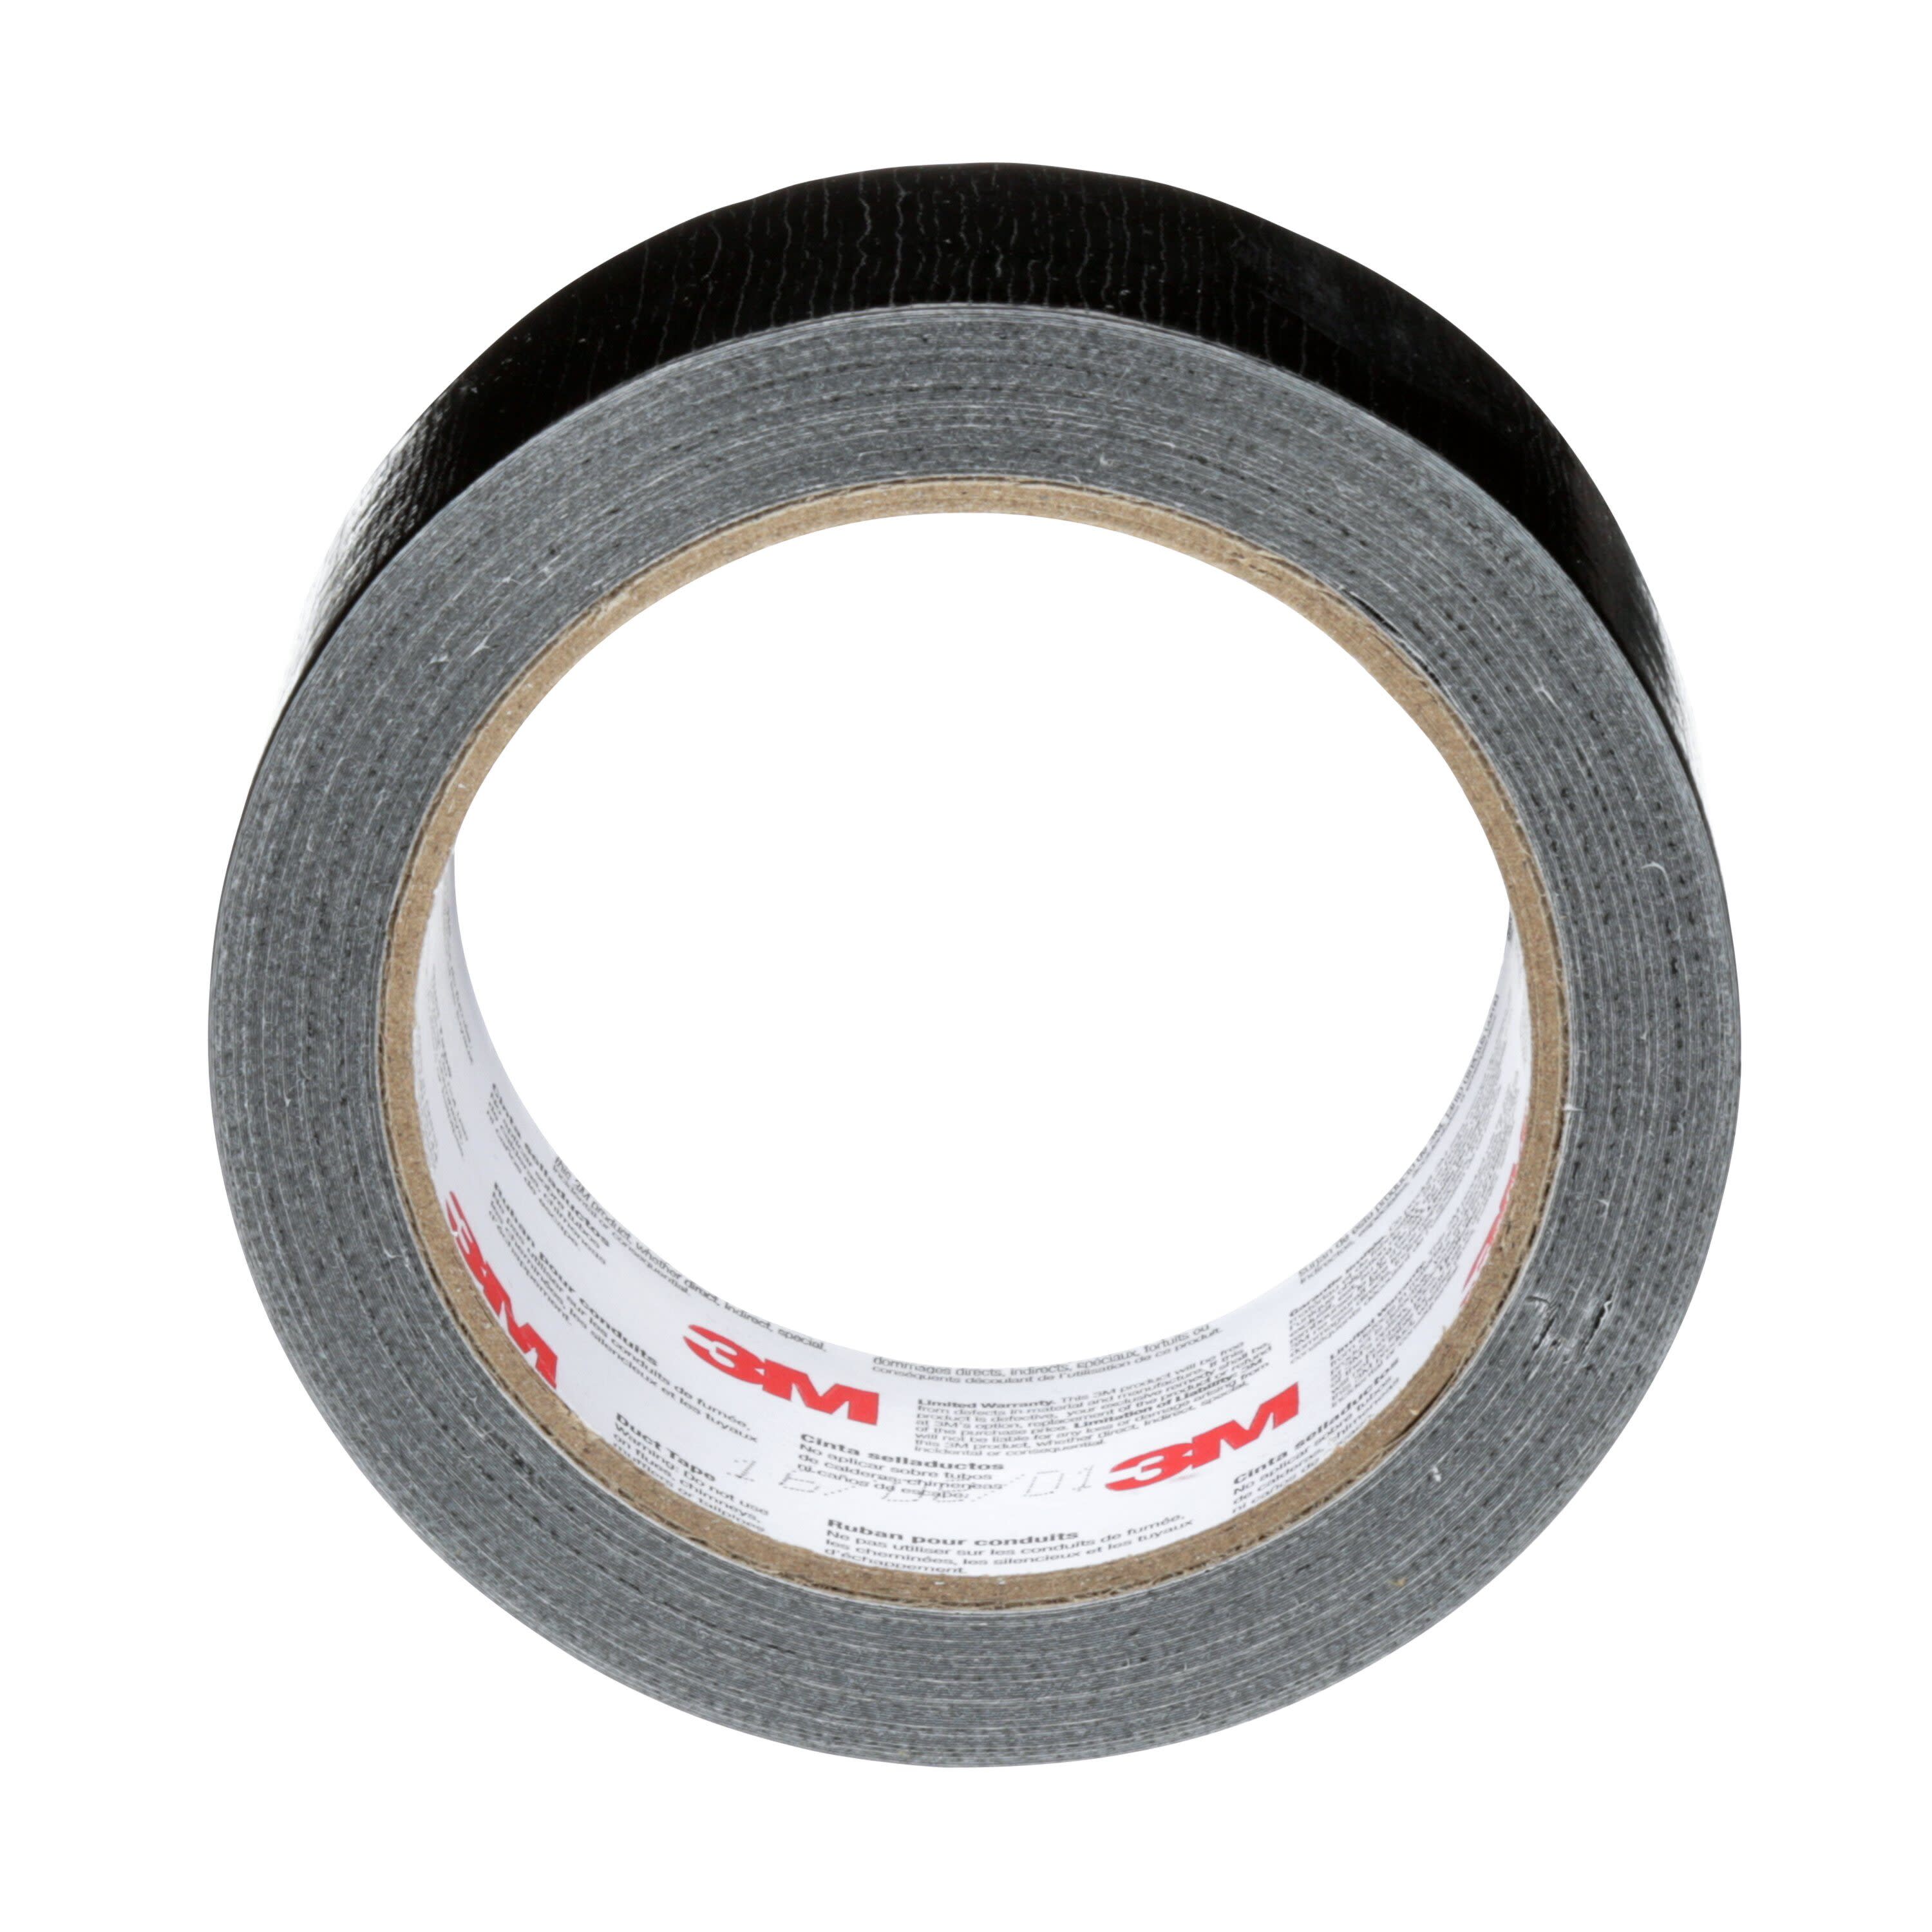 3m Fabric adhesive tape 1909 48mmx50m, black (9915 0111) - merXu -  Negotiate prices! Wholesale purchases!